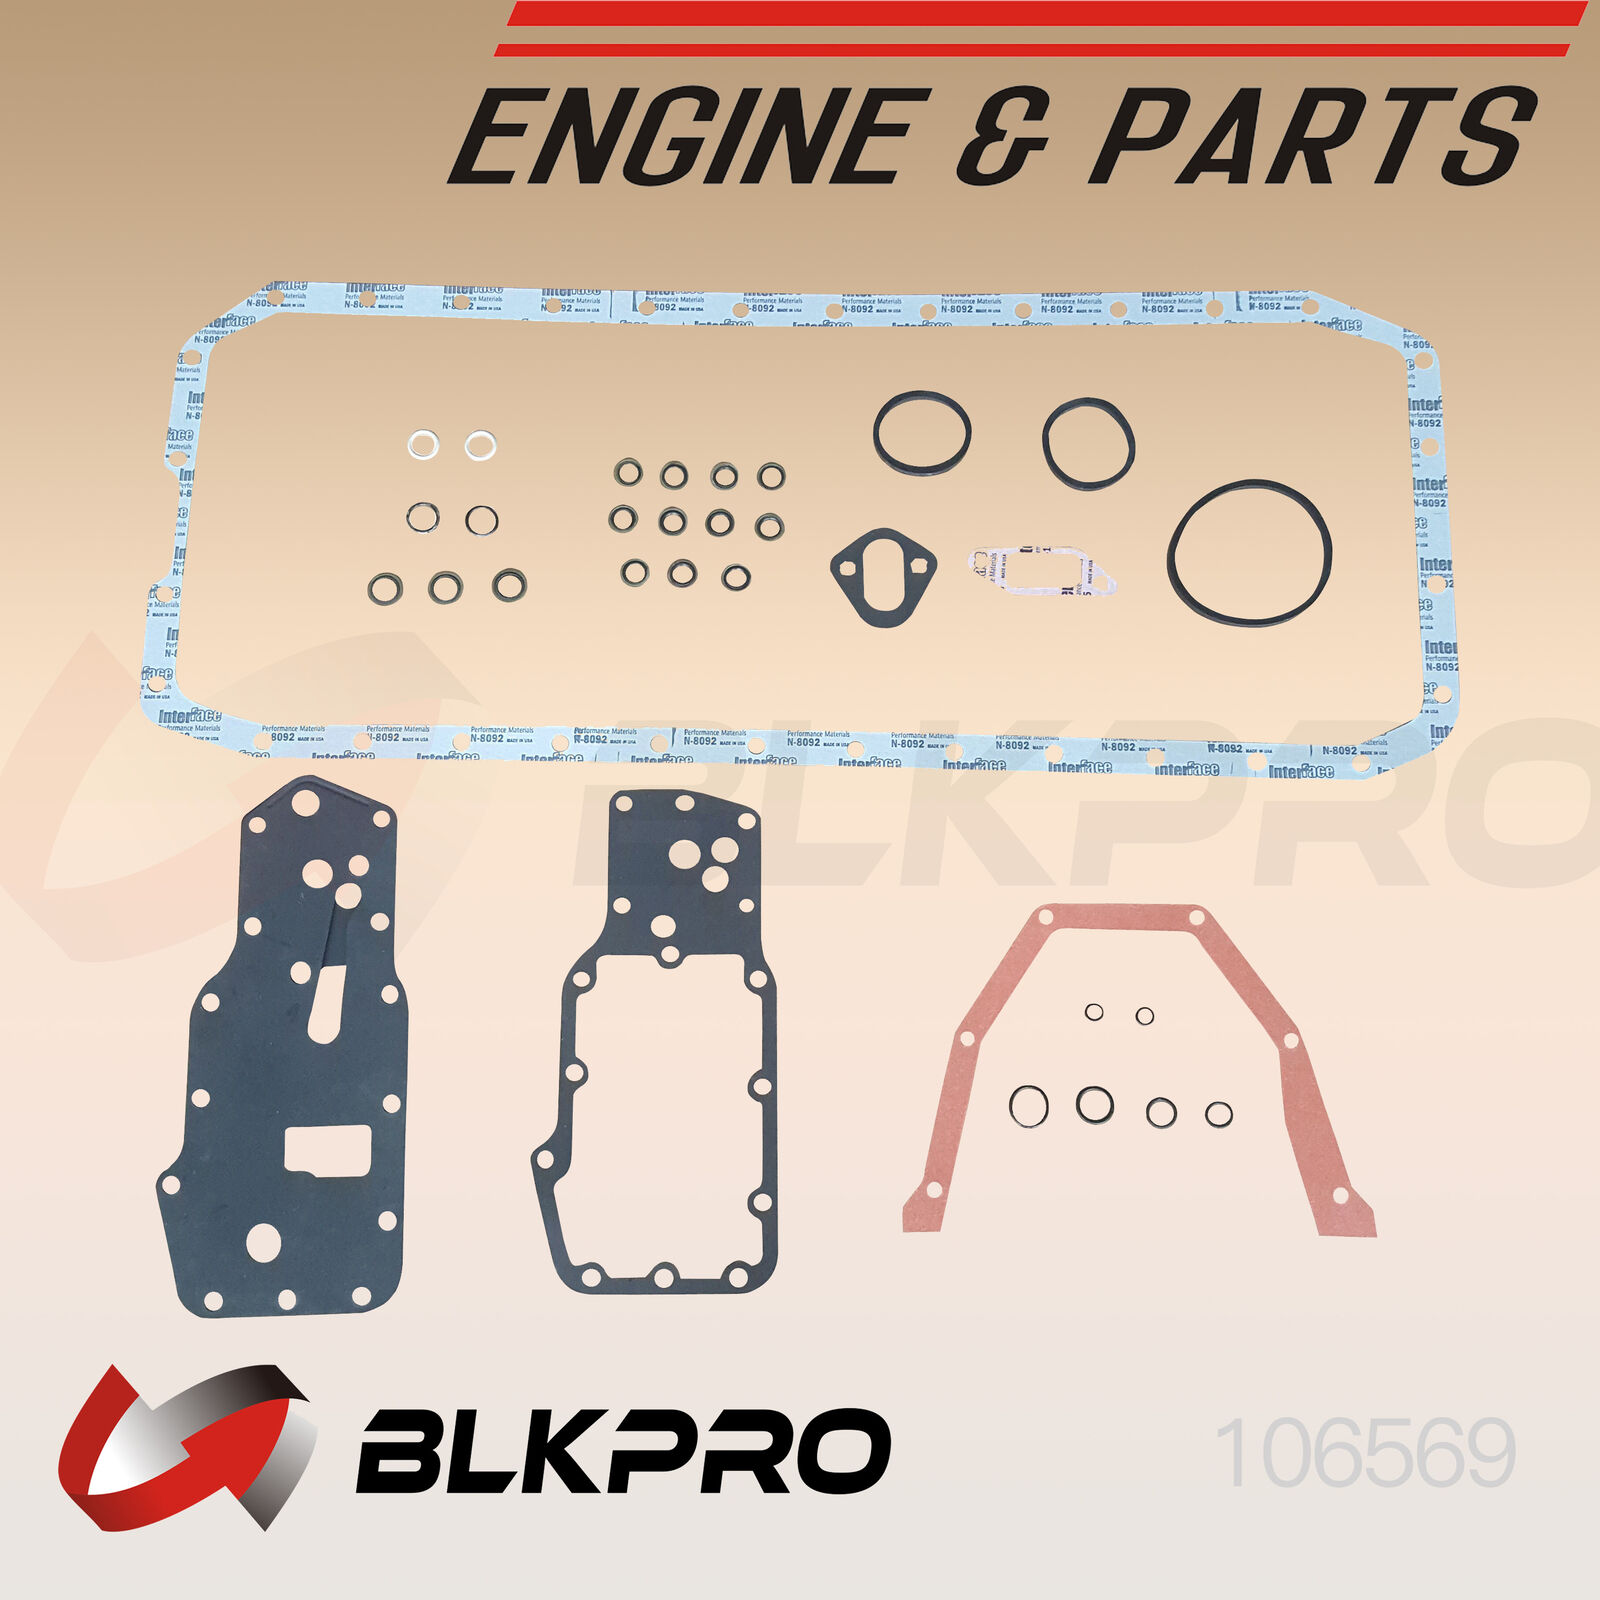 Lower Gasket Set Made In USA Material For Dodge Ram 5.9L Cummins 03-06 Oil Pan